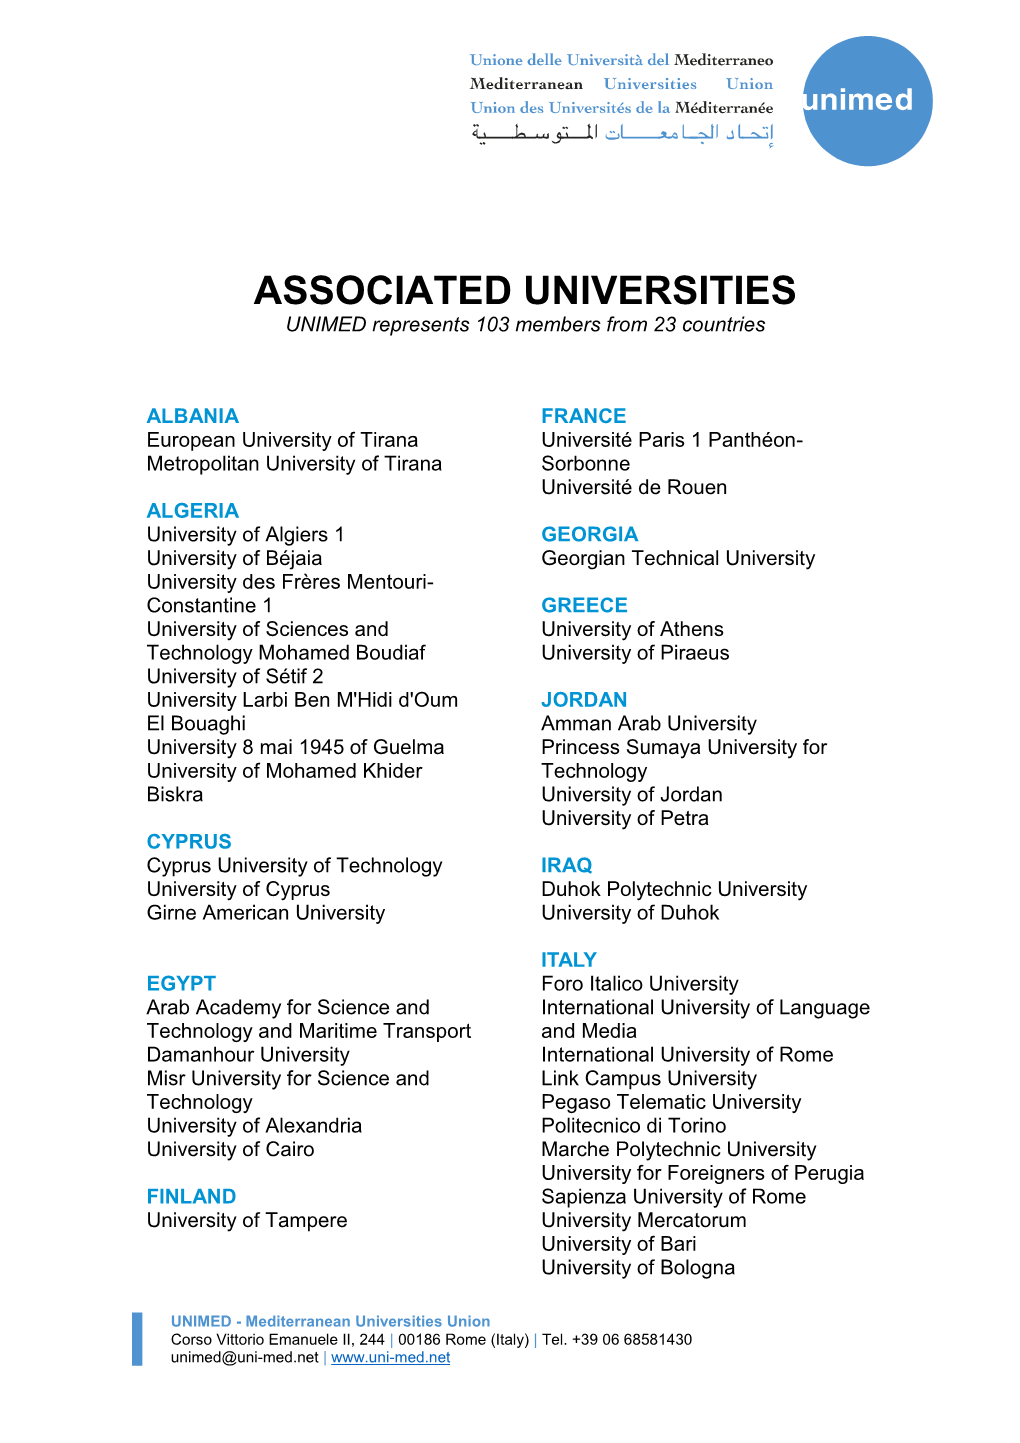 ASSOCIATED UNIVERSITIES UNIMED Represents 103 Members from 23 Countries